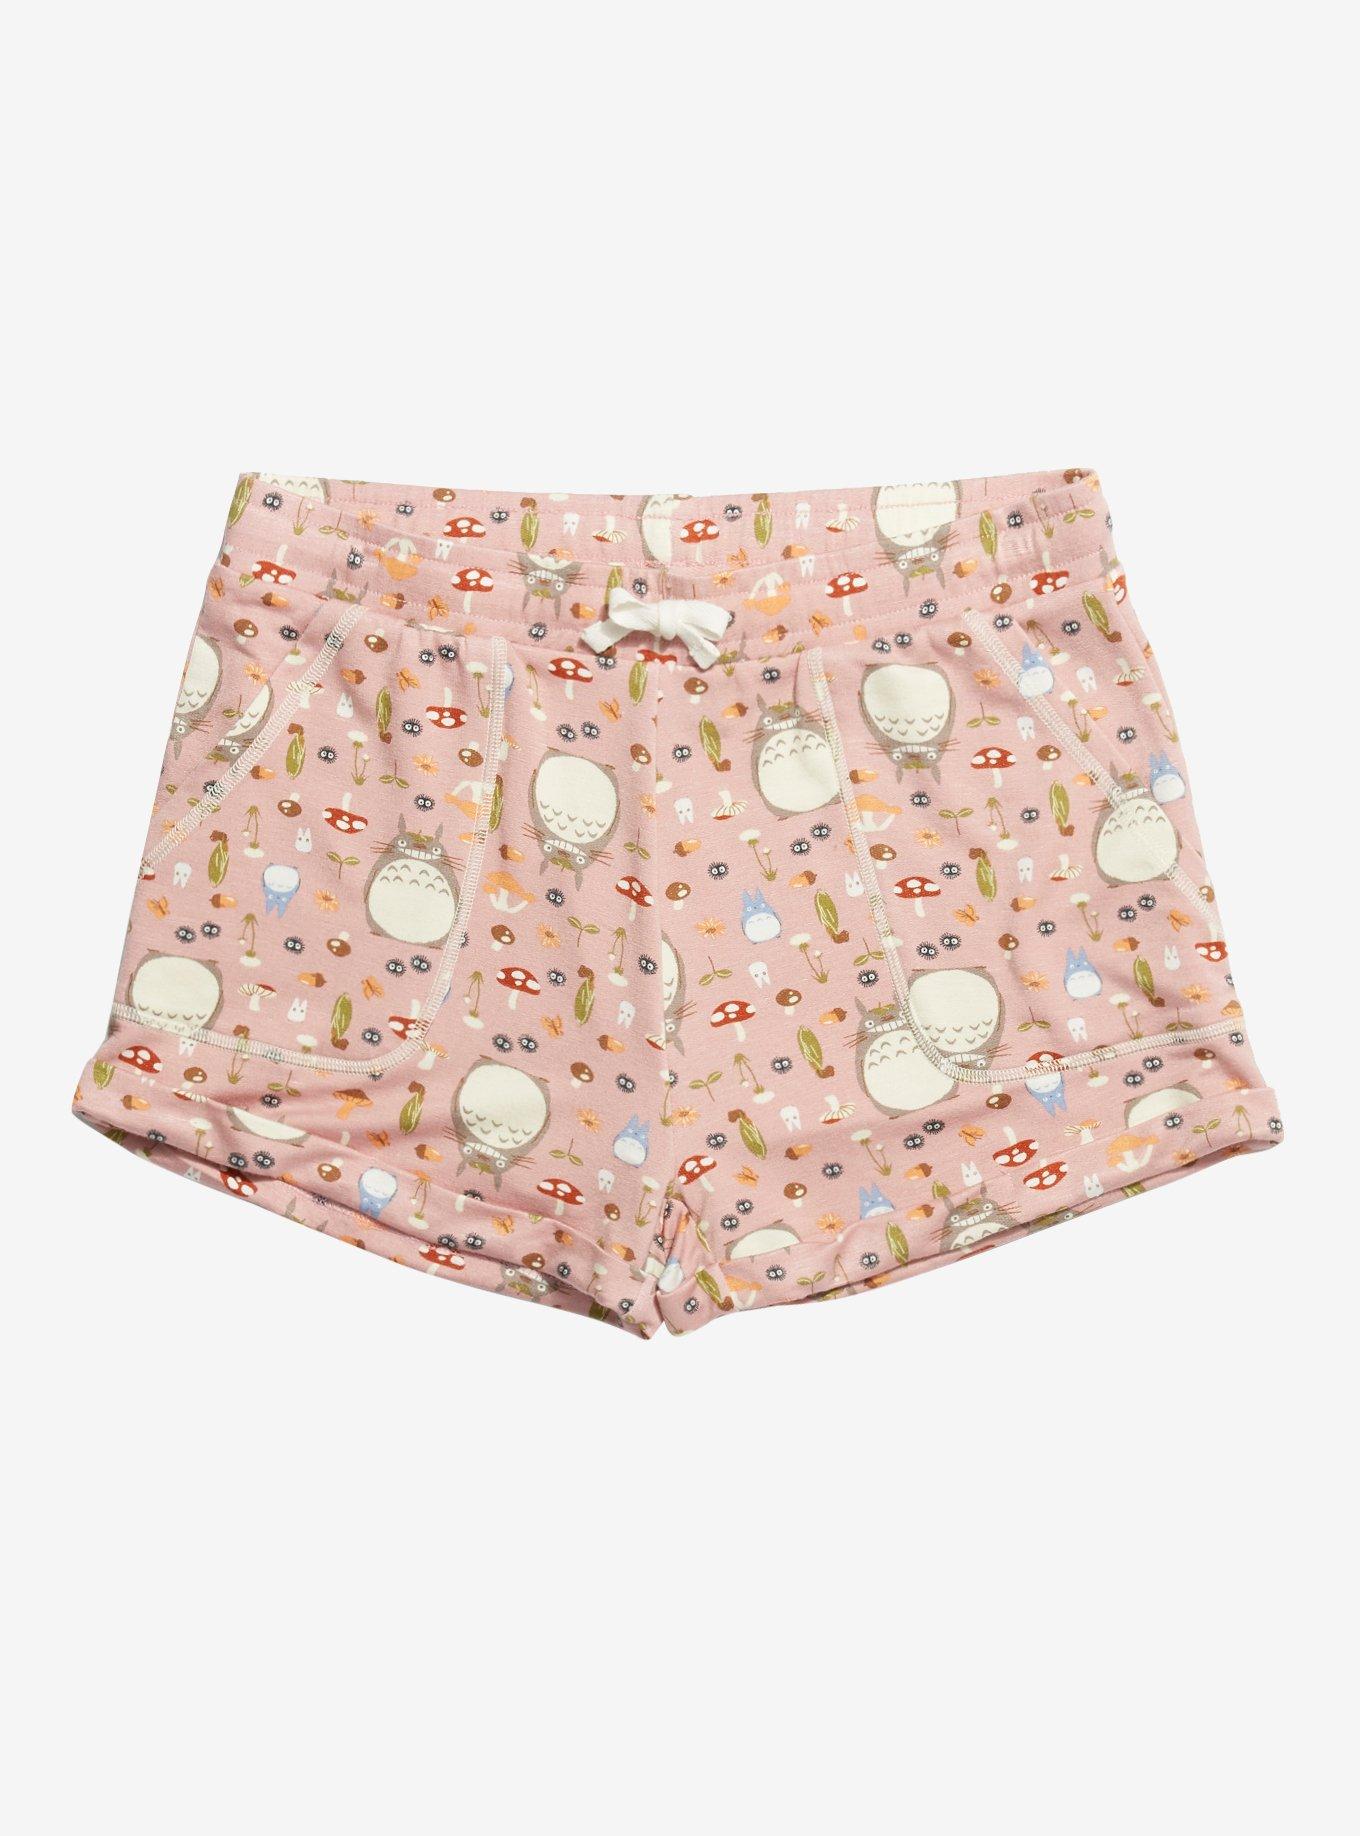 Studio Ghibli Earth Day Collection My Neighbor Totoro Forest Friends Girls Lounge Shorts Plus Size, PINK, hi-res